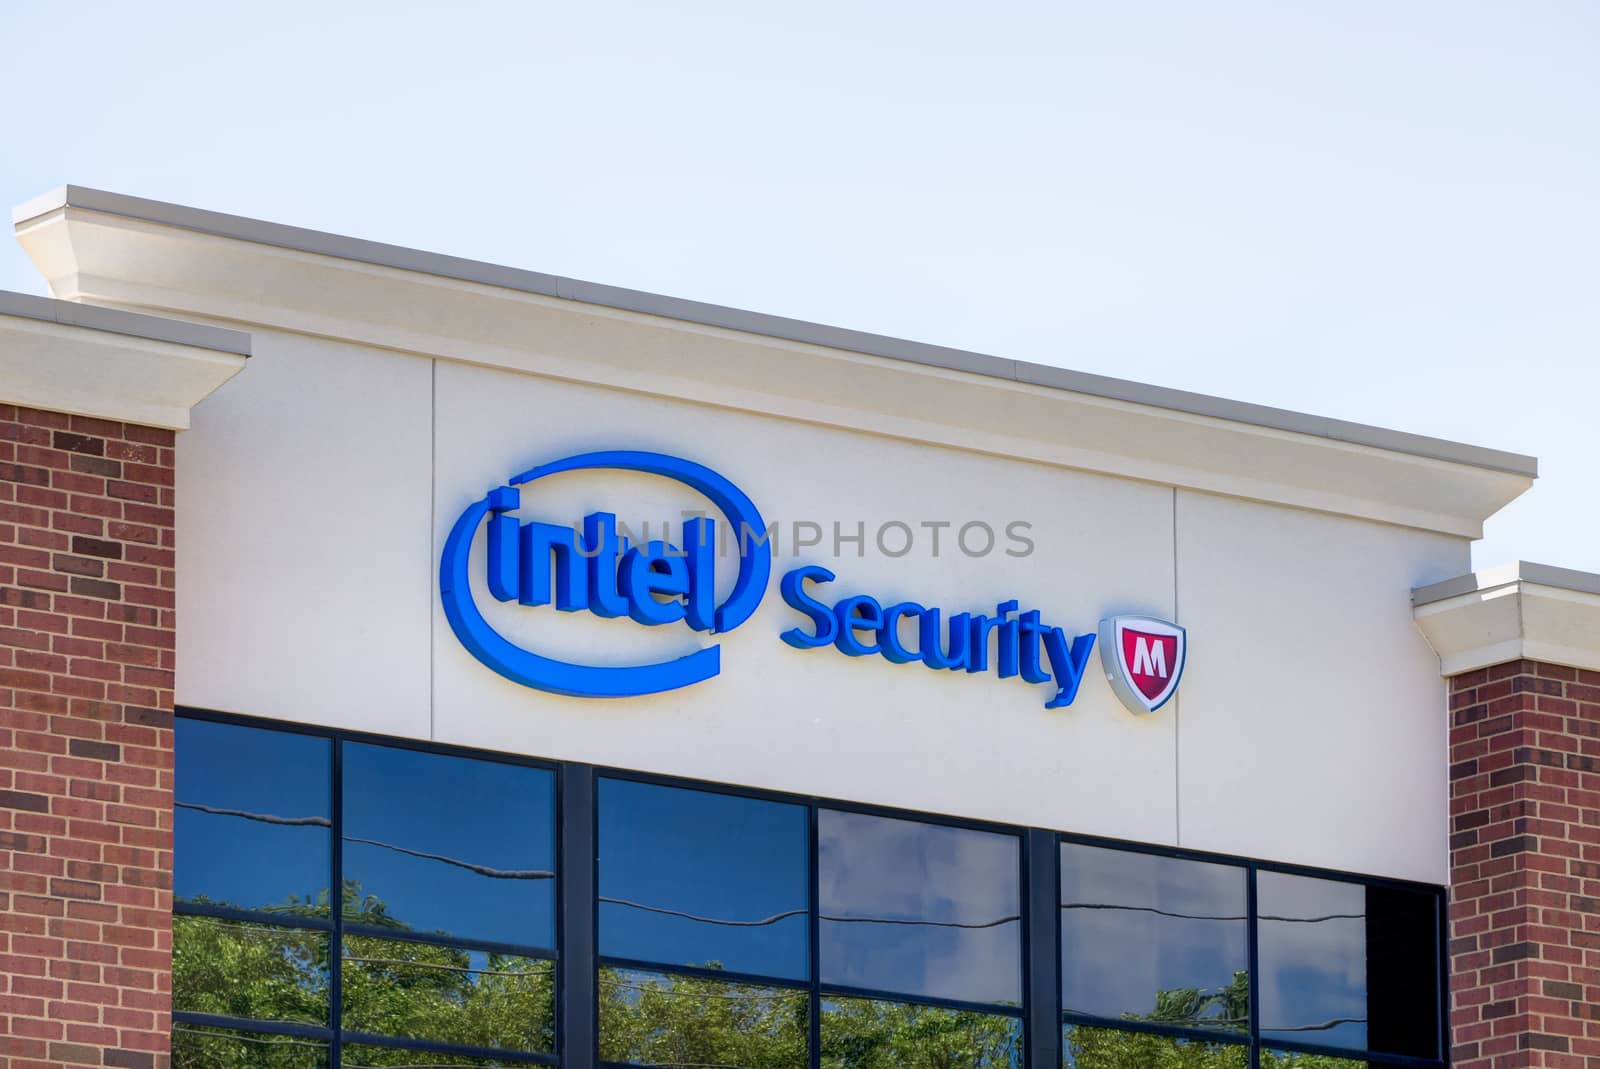 Intel Security Office Building by wolterk